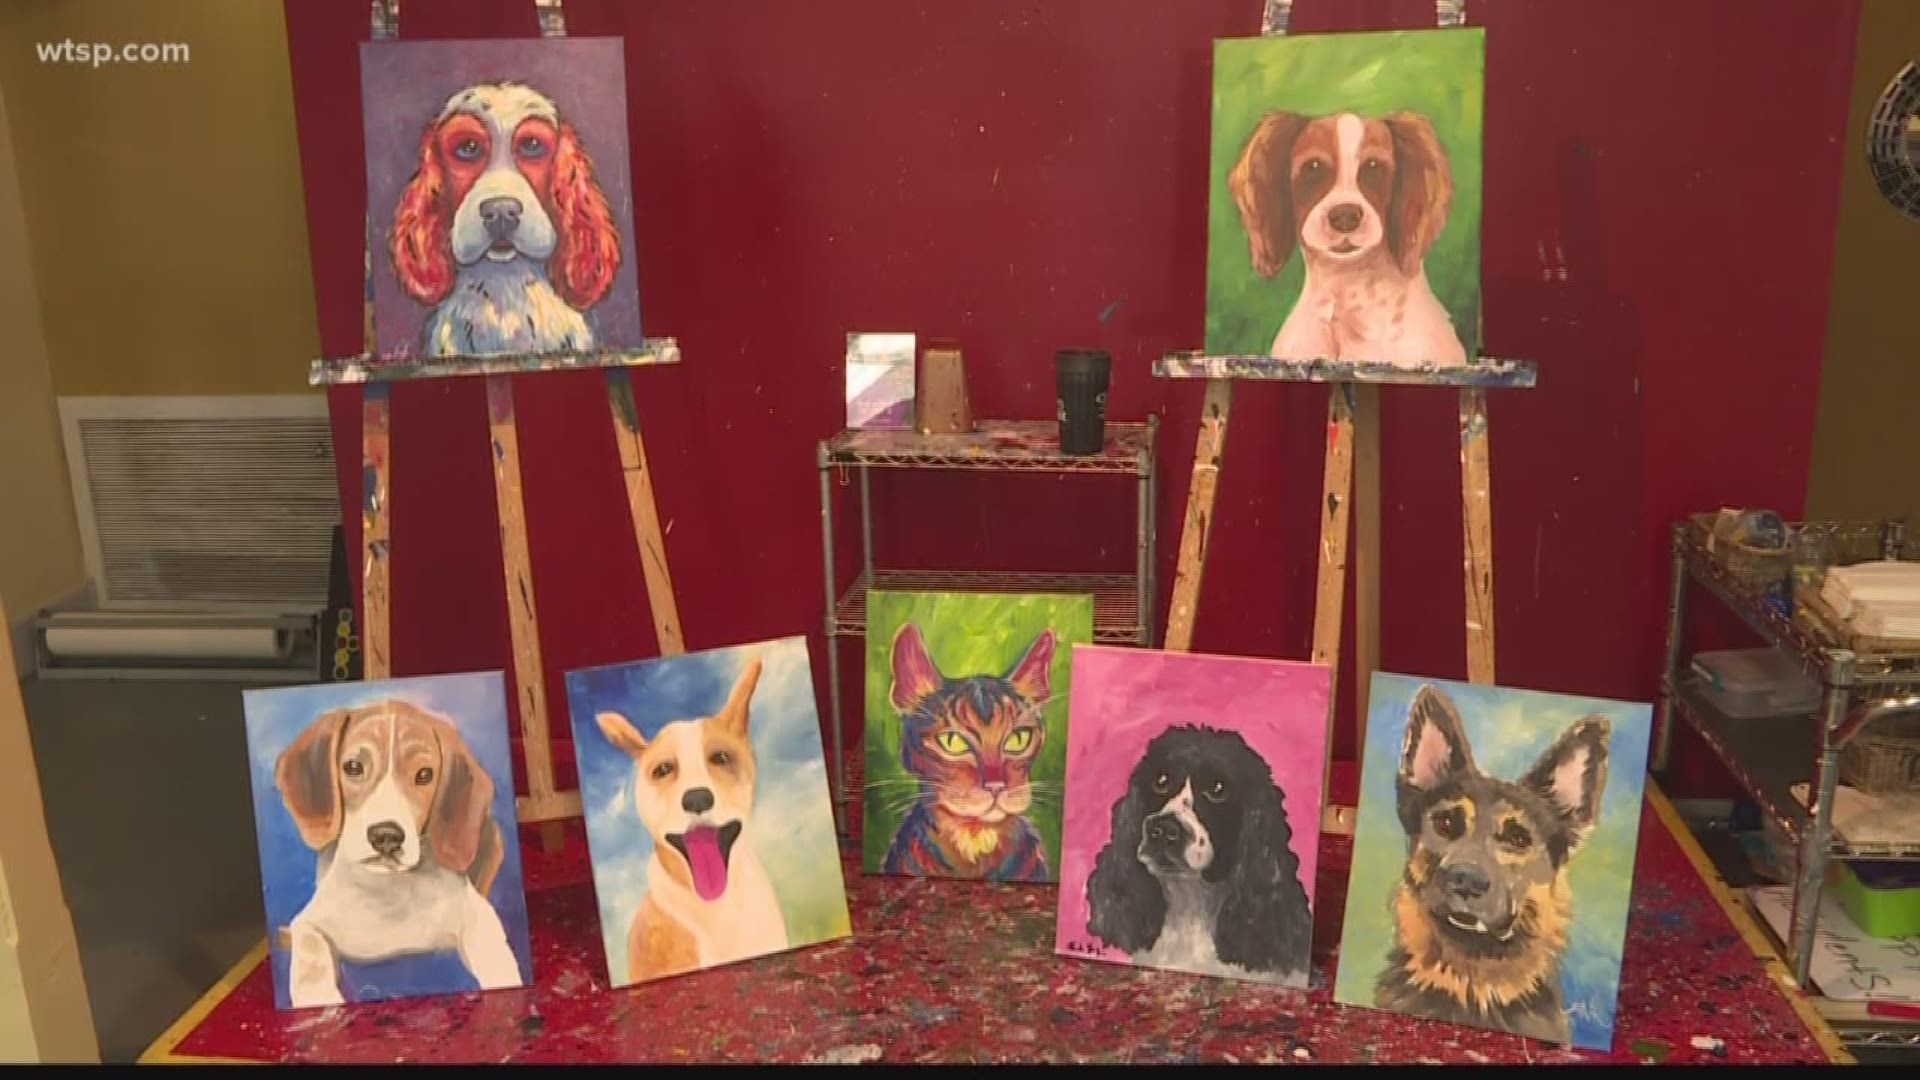 The St. Petersburg location of Painting with a Twist is having a special class this Saturday.

Student’s in the “Painting with a Purpose” class will paint a picture of their pet with 50 percent of the proceeds going directly to the Suncoast Basset Hound Rescue.

All are welcome, even if you don’t have experience. You can even bring your own bottle of wine or beer with some snacks.

Spots are limited for the class. Anyone wanting to reserve a spot can call (727)327-4488.